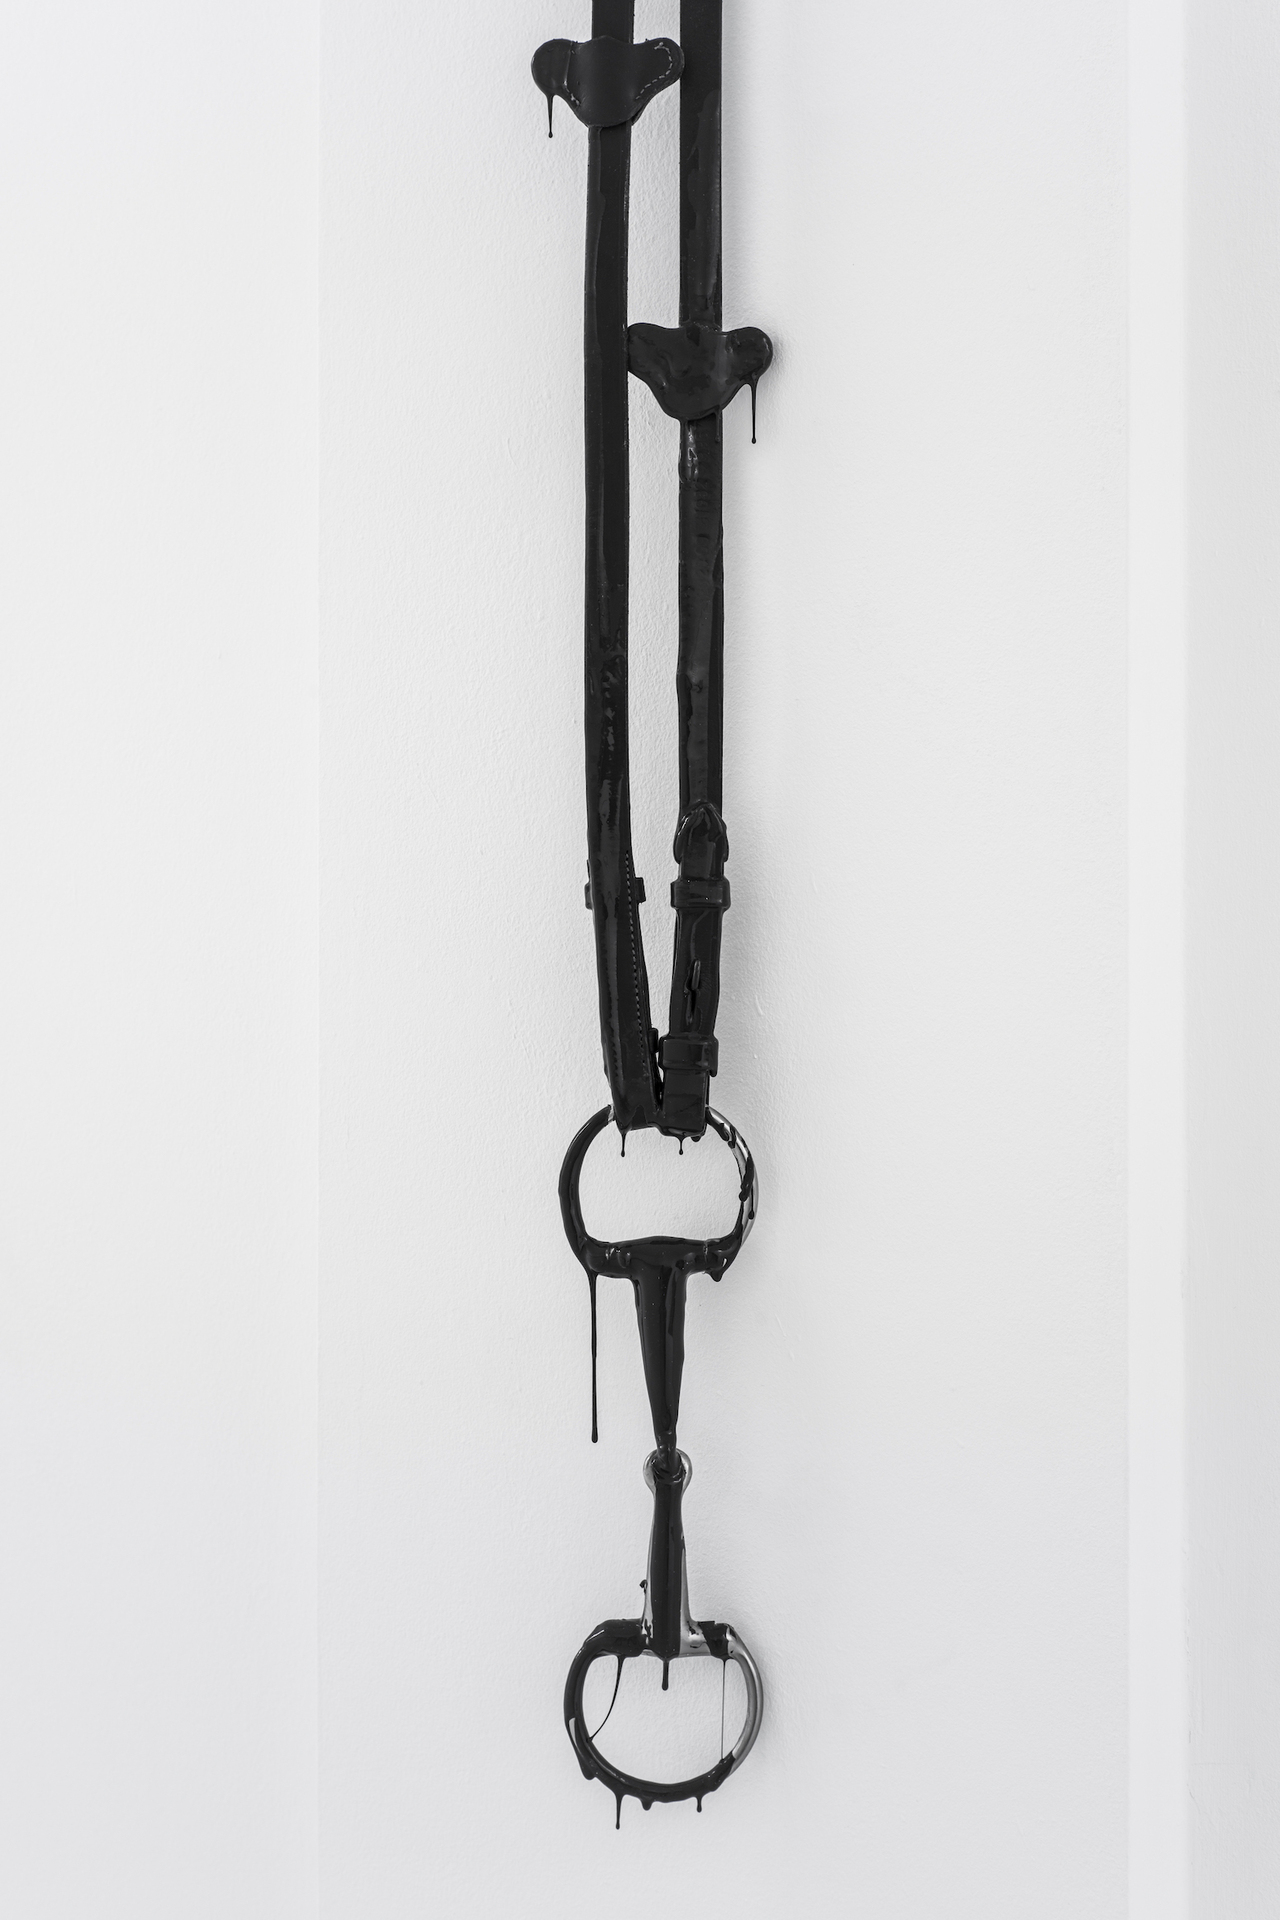 Eliza Ballesteros, Horse Bite I, stainless steel snaffle, leather bridles, latex, eye plate, 8 x 180 cm, 2021